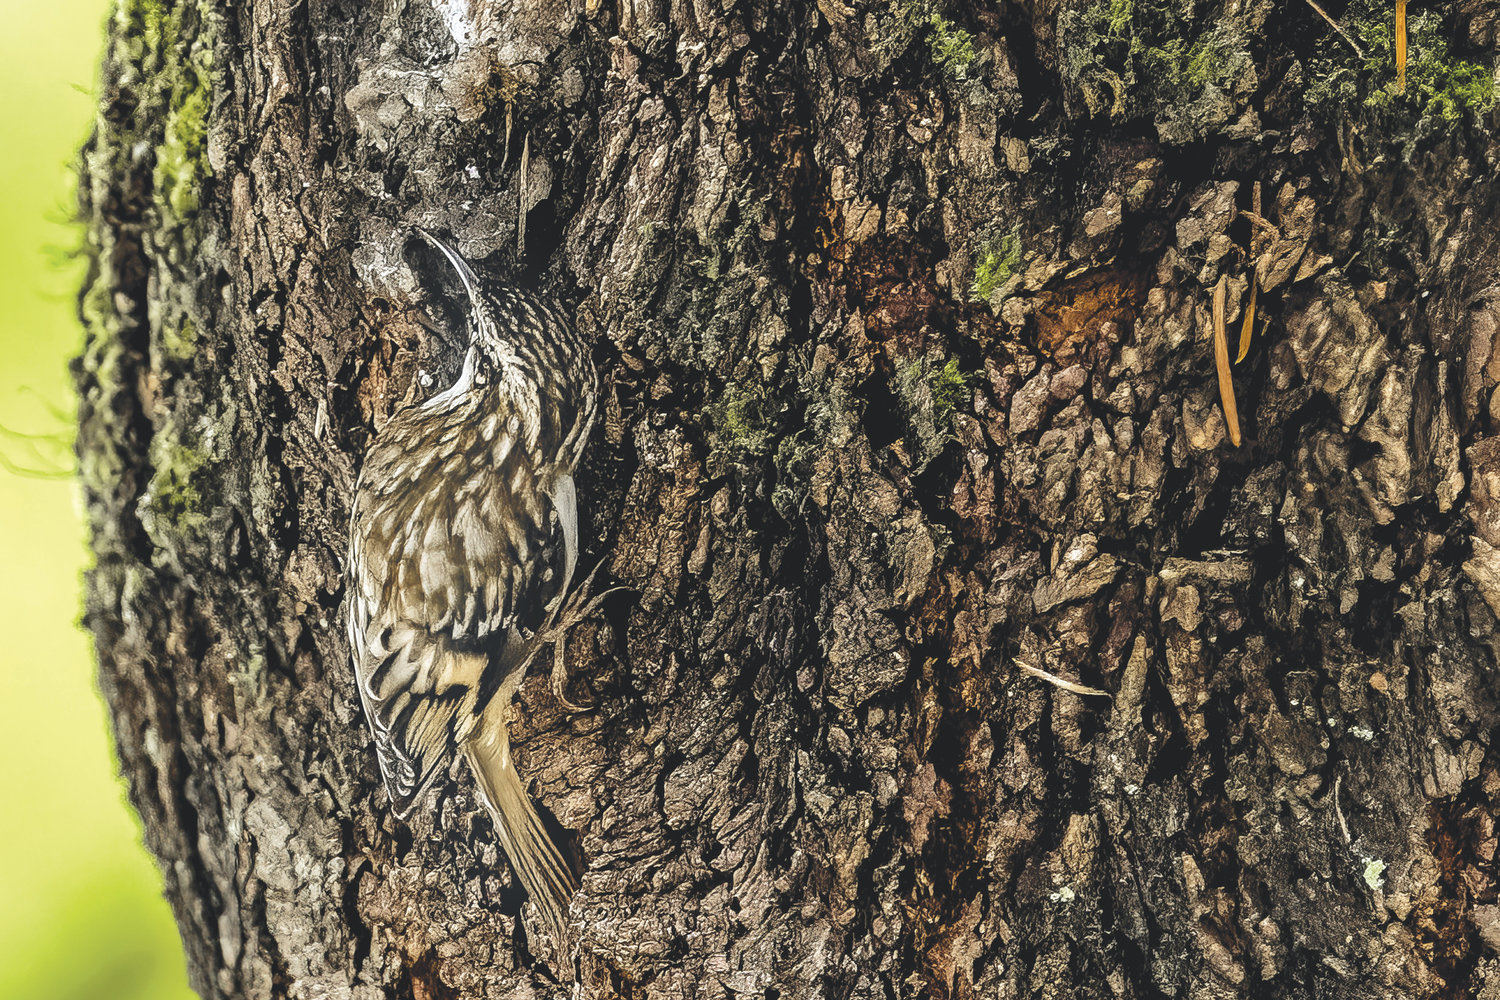 #15. Look closely to spot the brown creeper that all but disappears on the trunk of a Douglas fir.